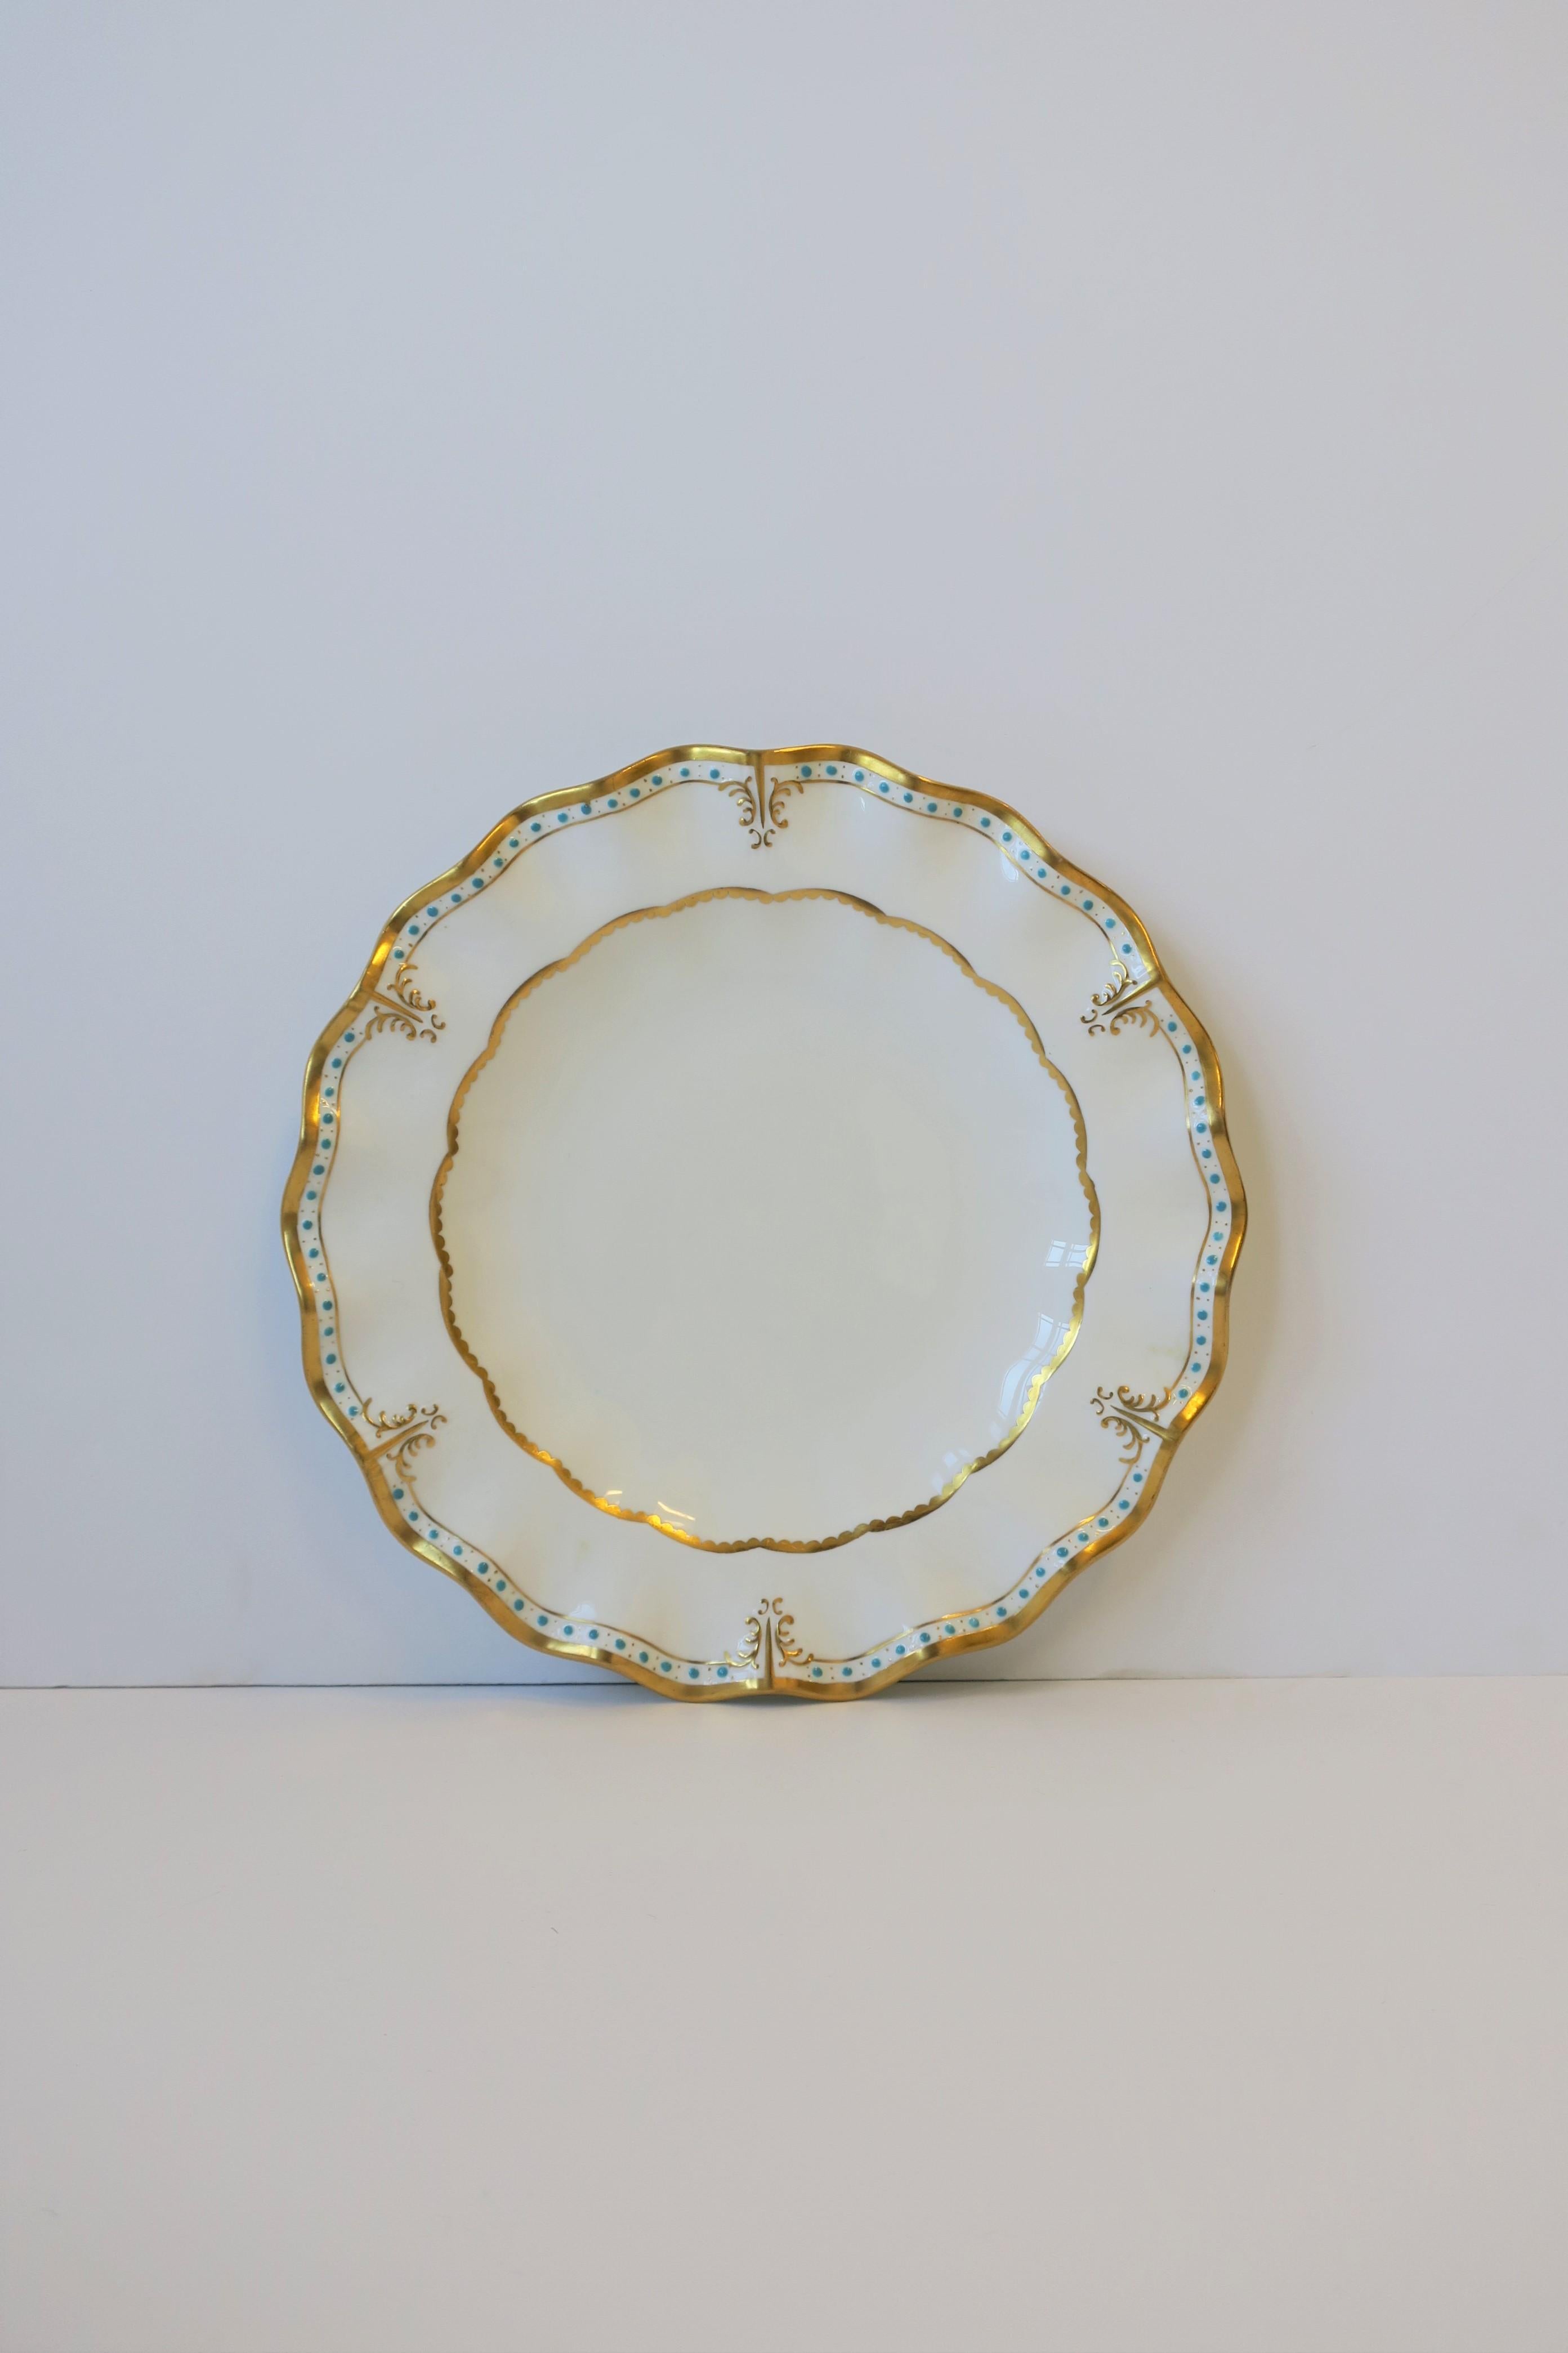 A beautiful set of 12 English 'fine bone china' porcelain dinner plates made by Royal Crown Derby, circa late 20th century, England. Plates are decorated with a 22-karat gold design and small turquoise blue dots - both raised, on an all white